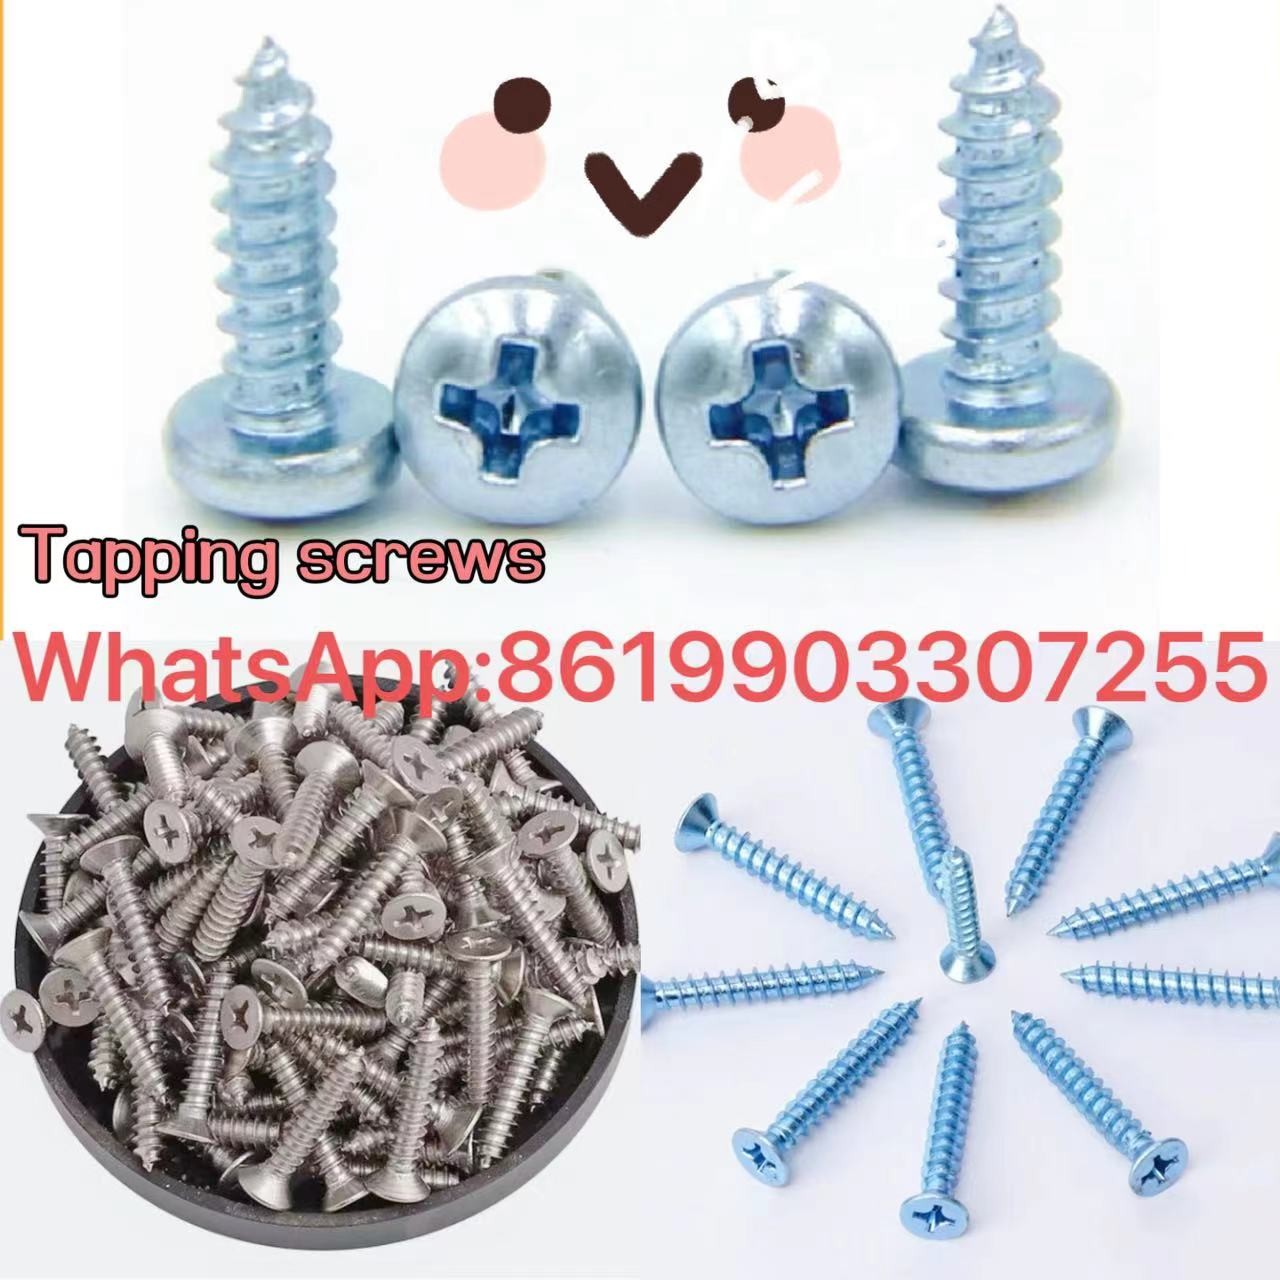 manufacturer’s tapping screws WhatsApp:8619903307255-pic_1